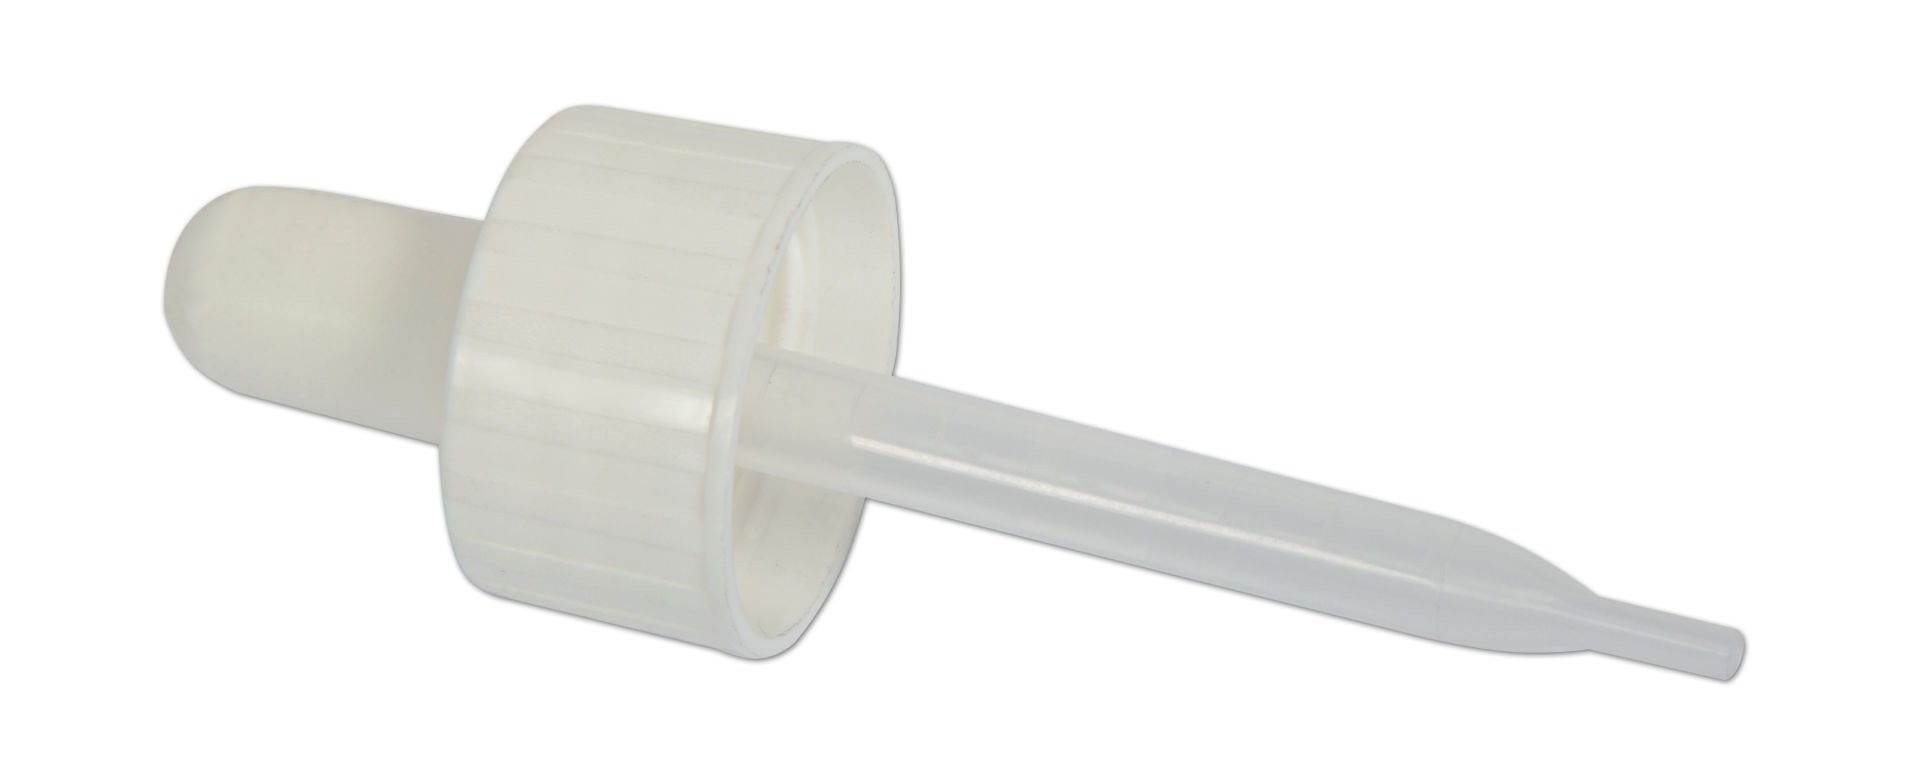 WHITE LOCKED DROPPER WITH PIPETTE 18 MOUTH